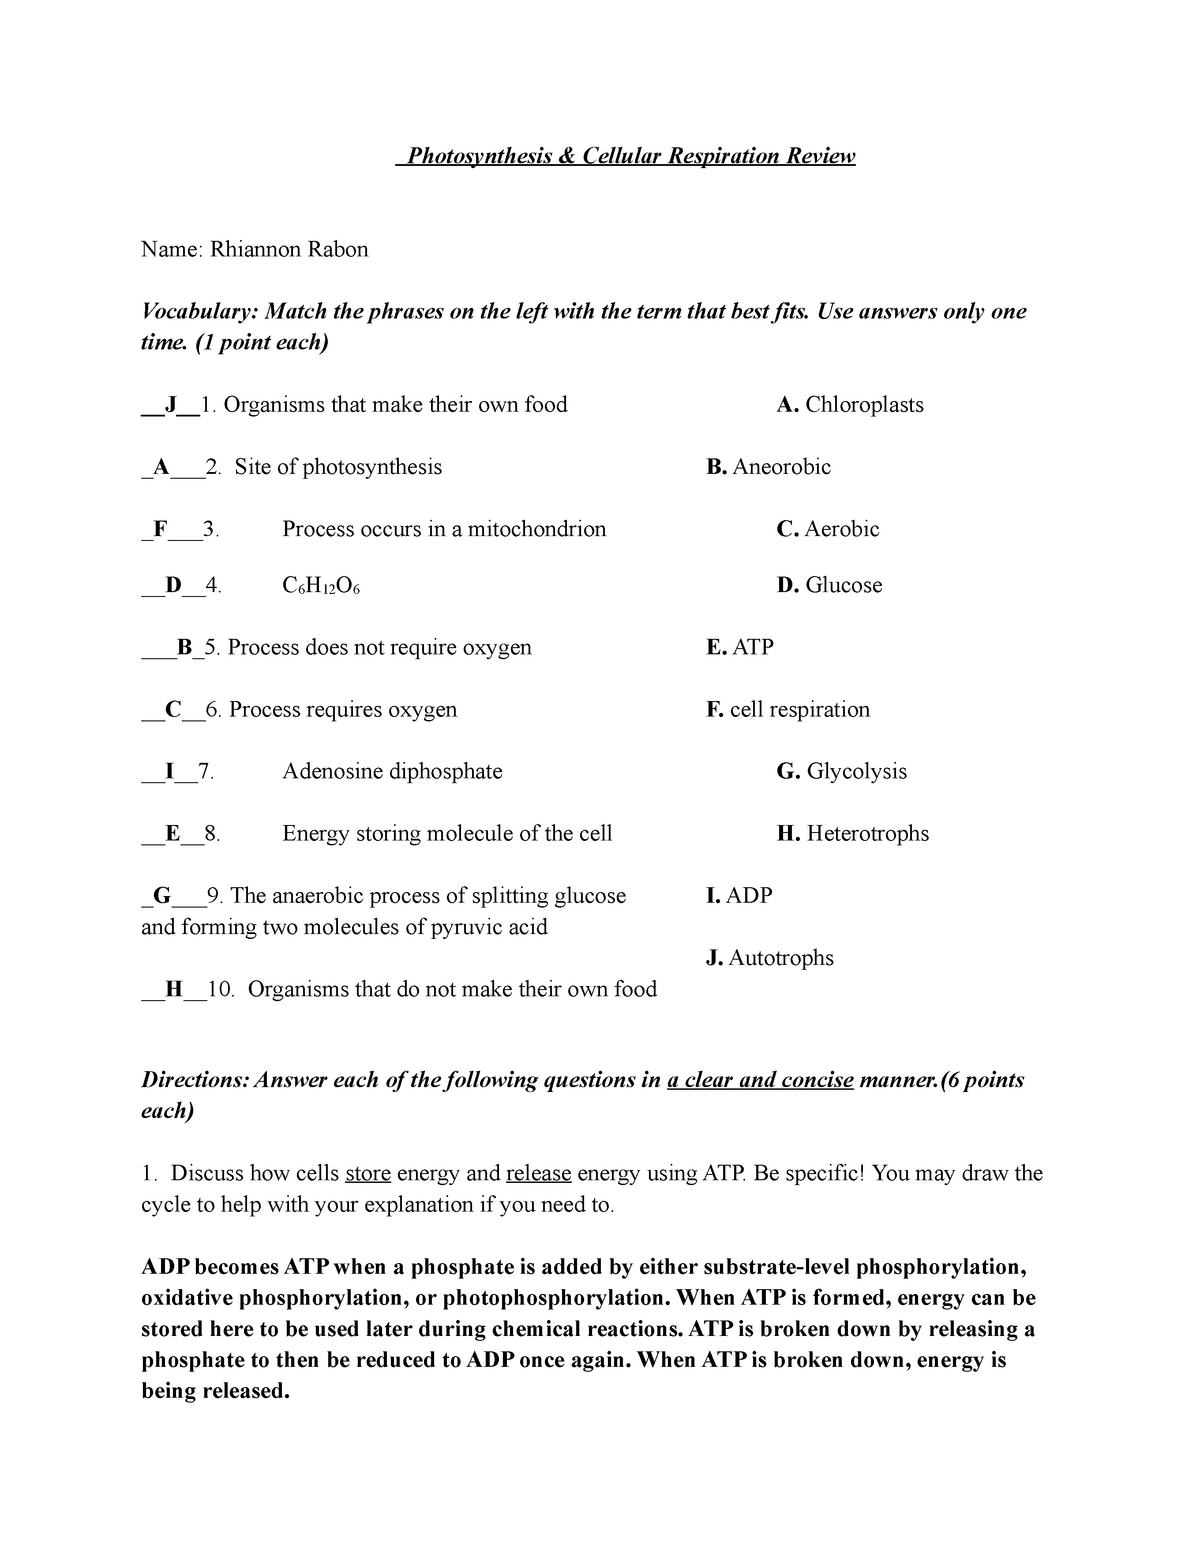 Photosynthesis & Cellular Respiration Review - BIO-22 - General Pertaining To Photosynthesis And Cellular Respiration Worksheet